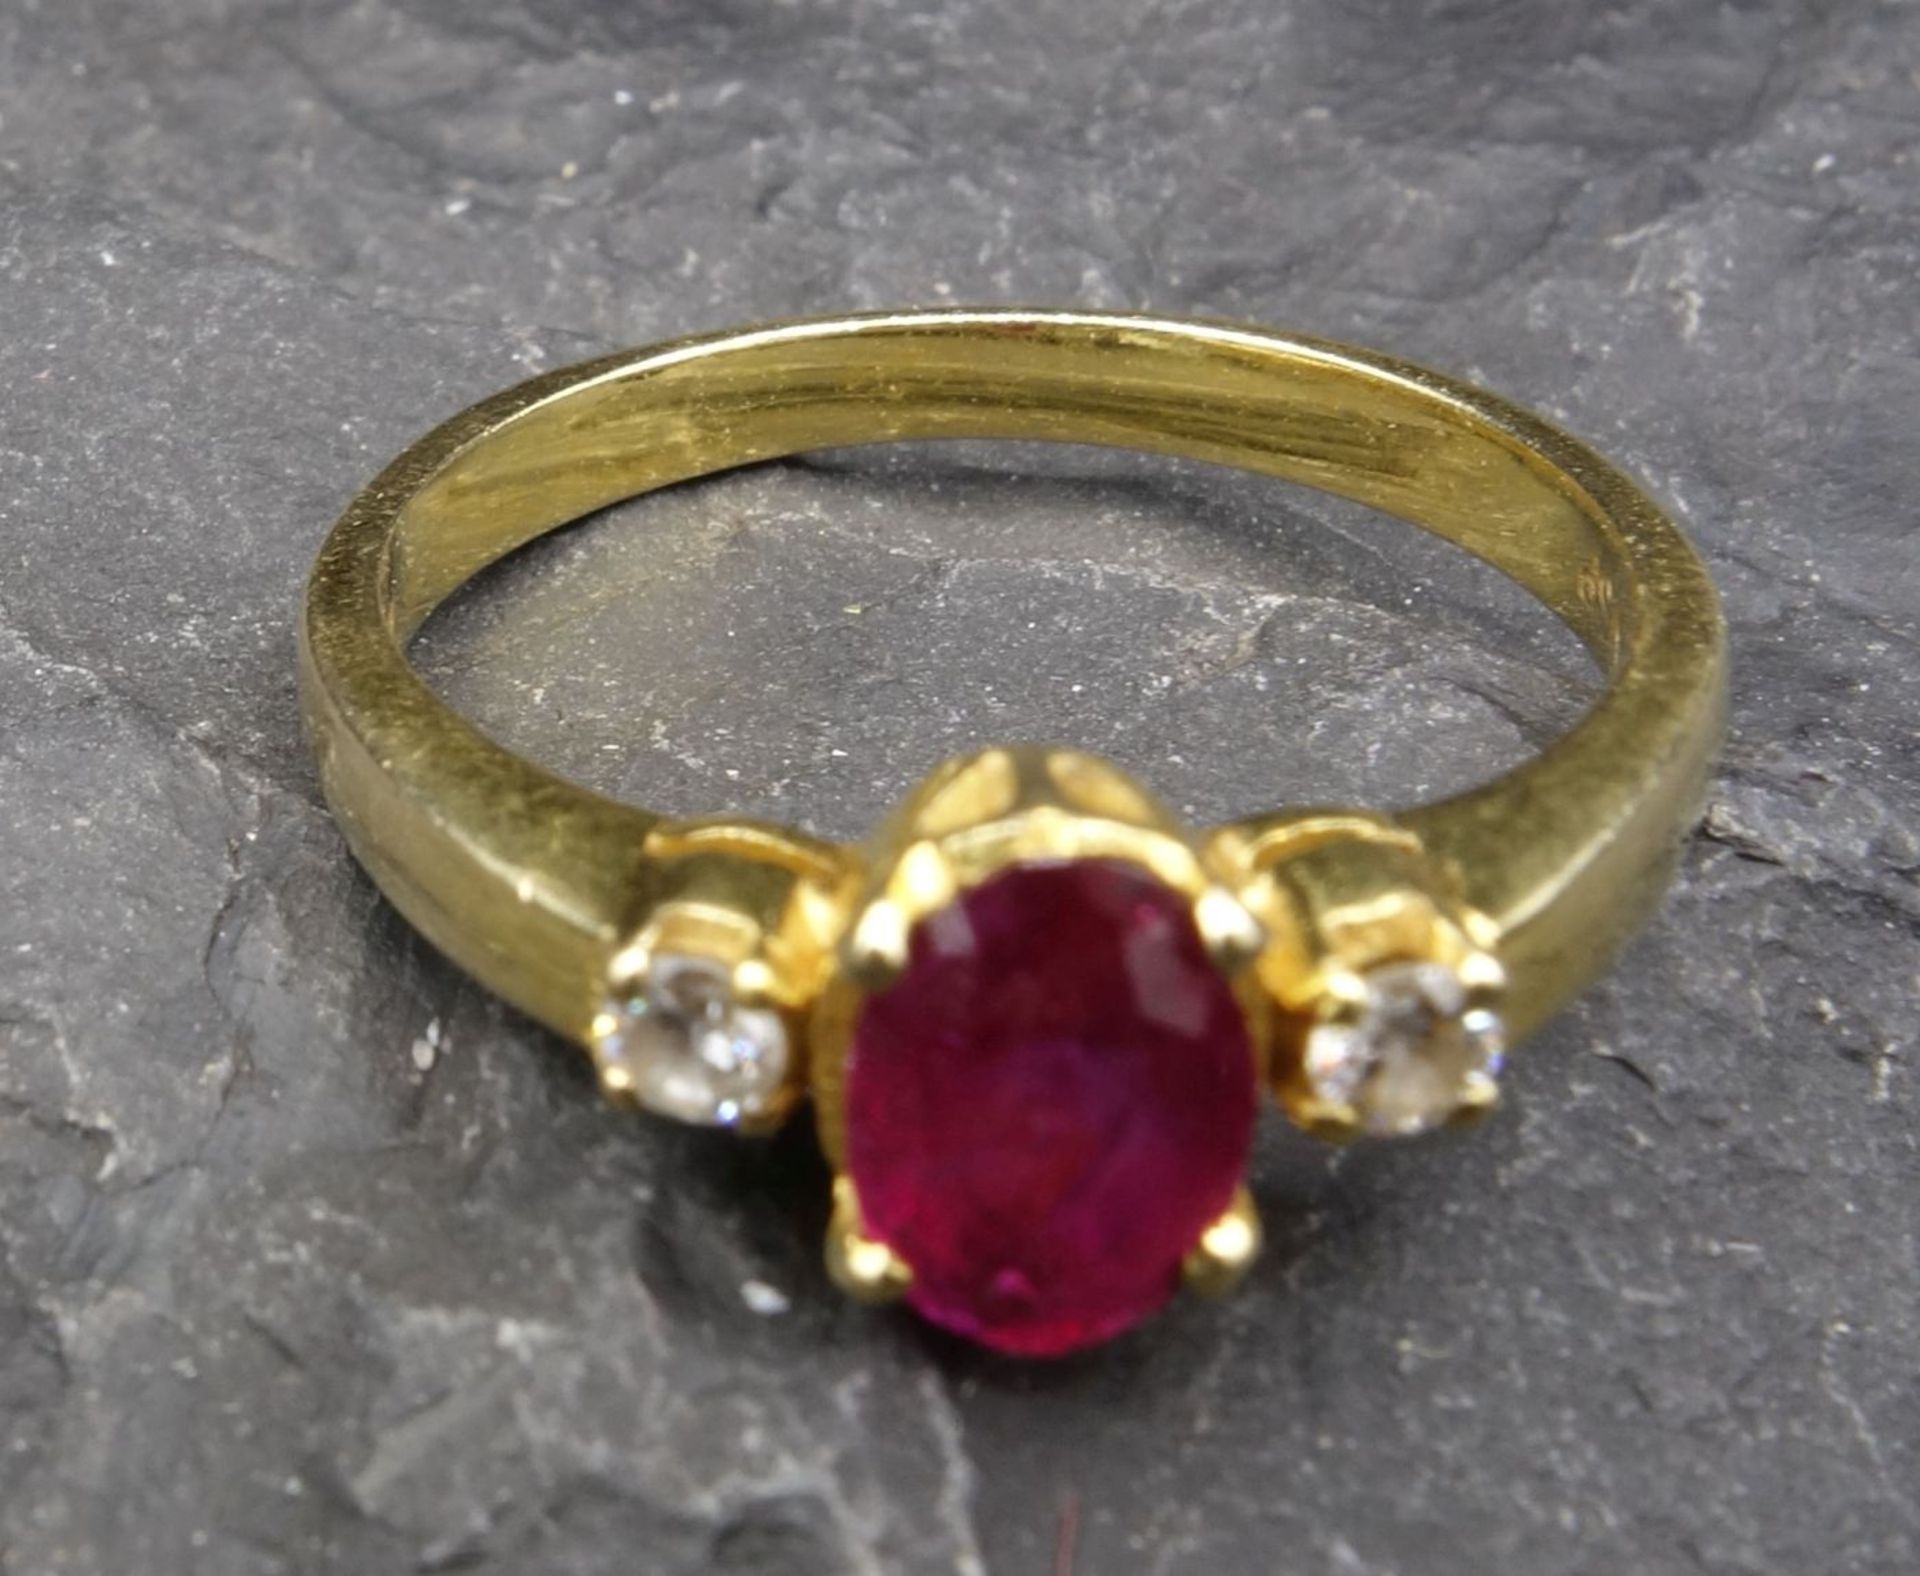 RING - 750 yellow gold - Image 3 of 4